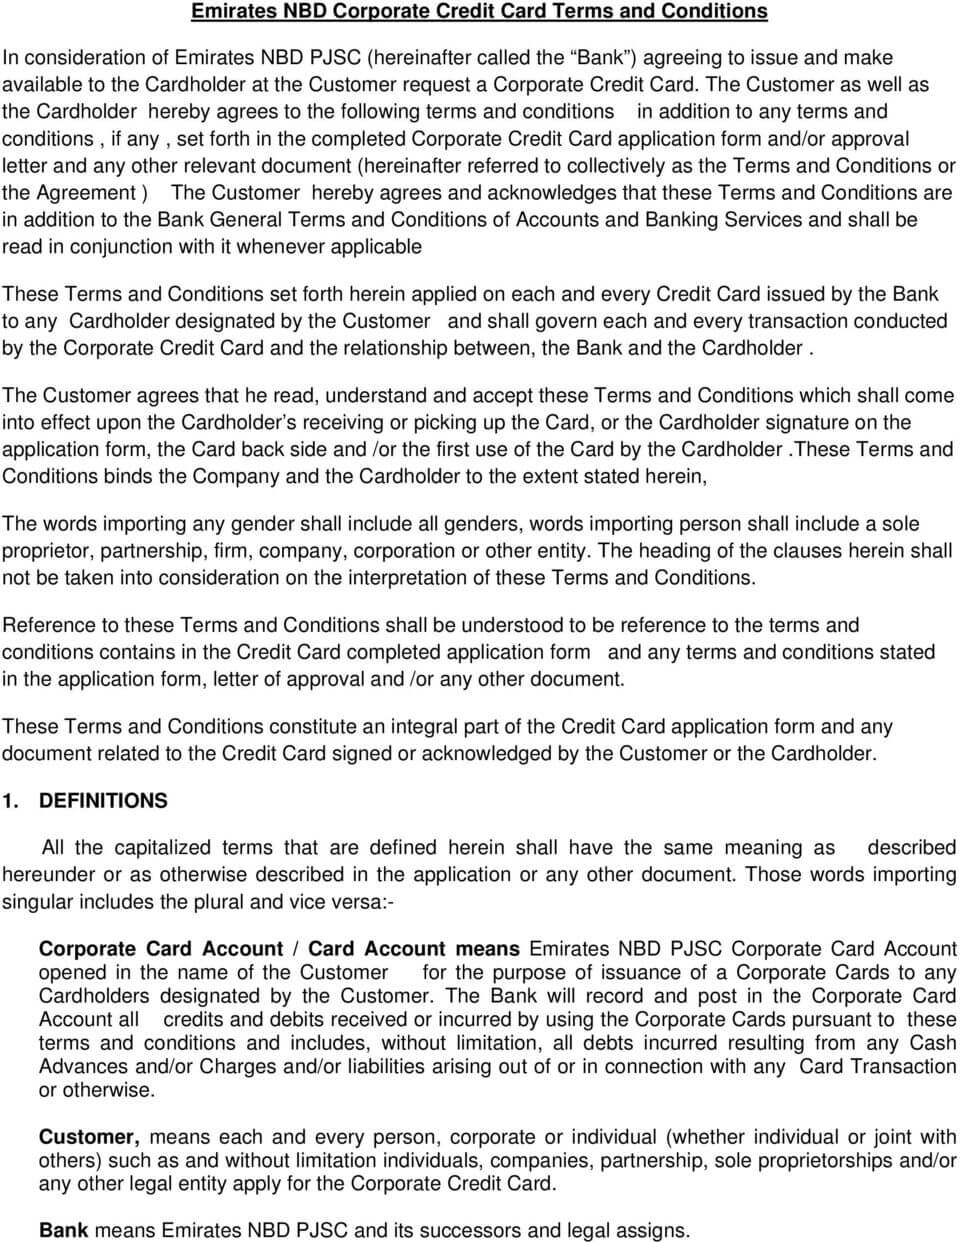 Emirates Nbd Corporate Credit Card Terms And Conditions For Corporate Credit Card Agreement Template